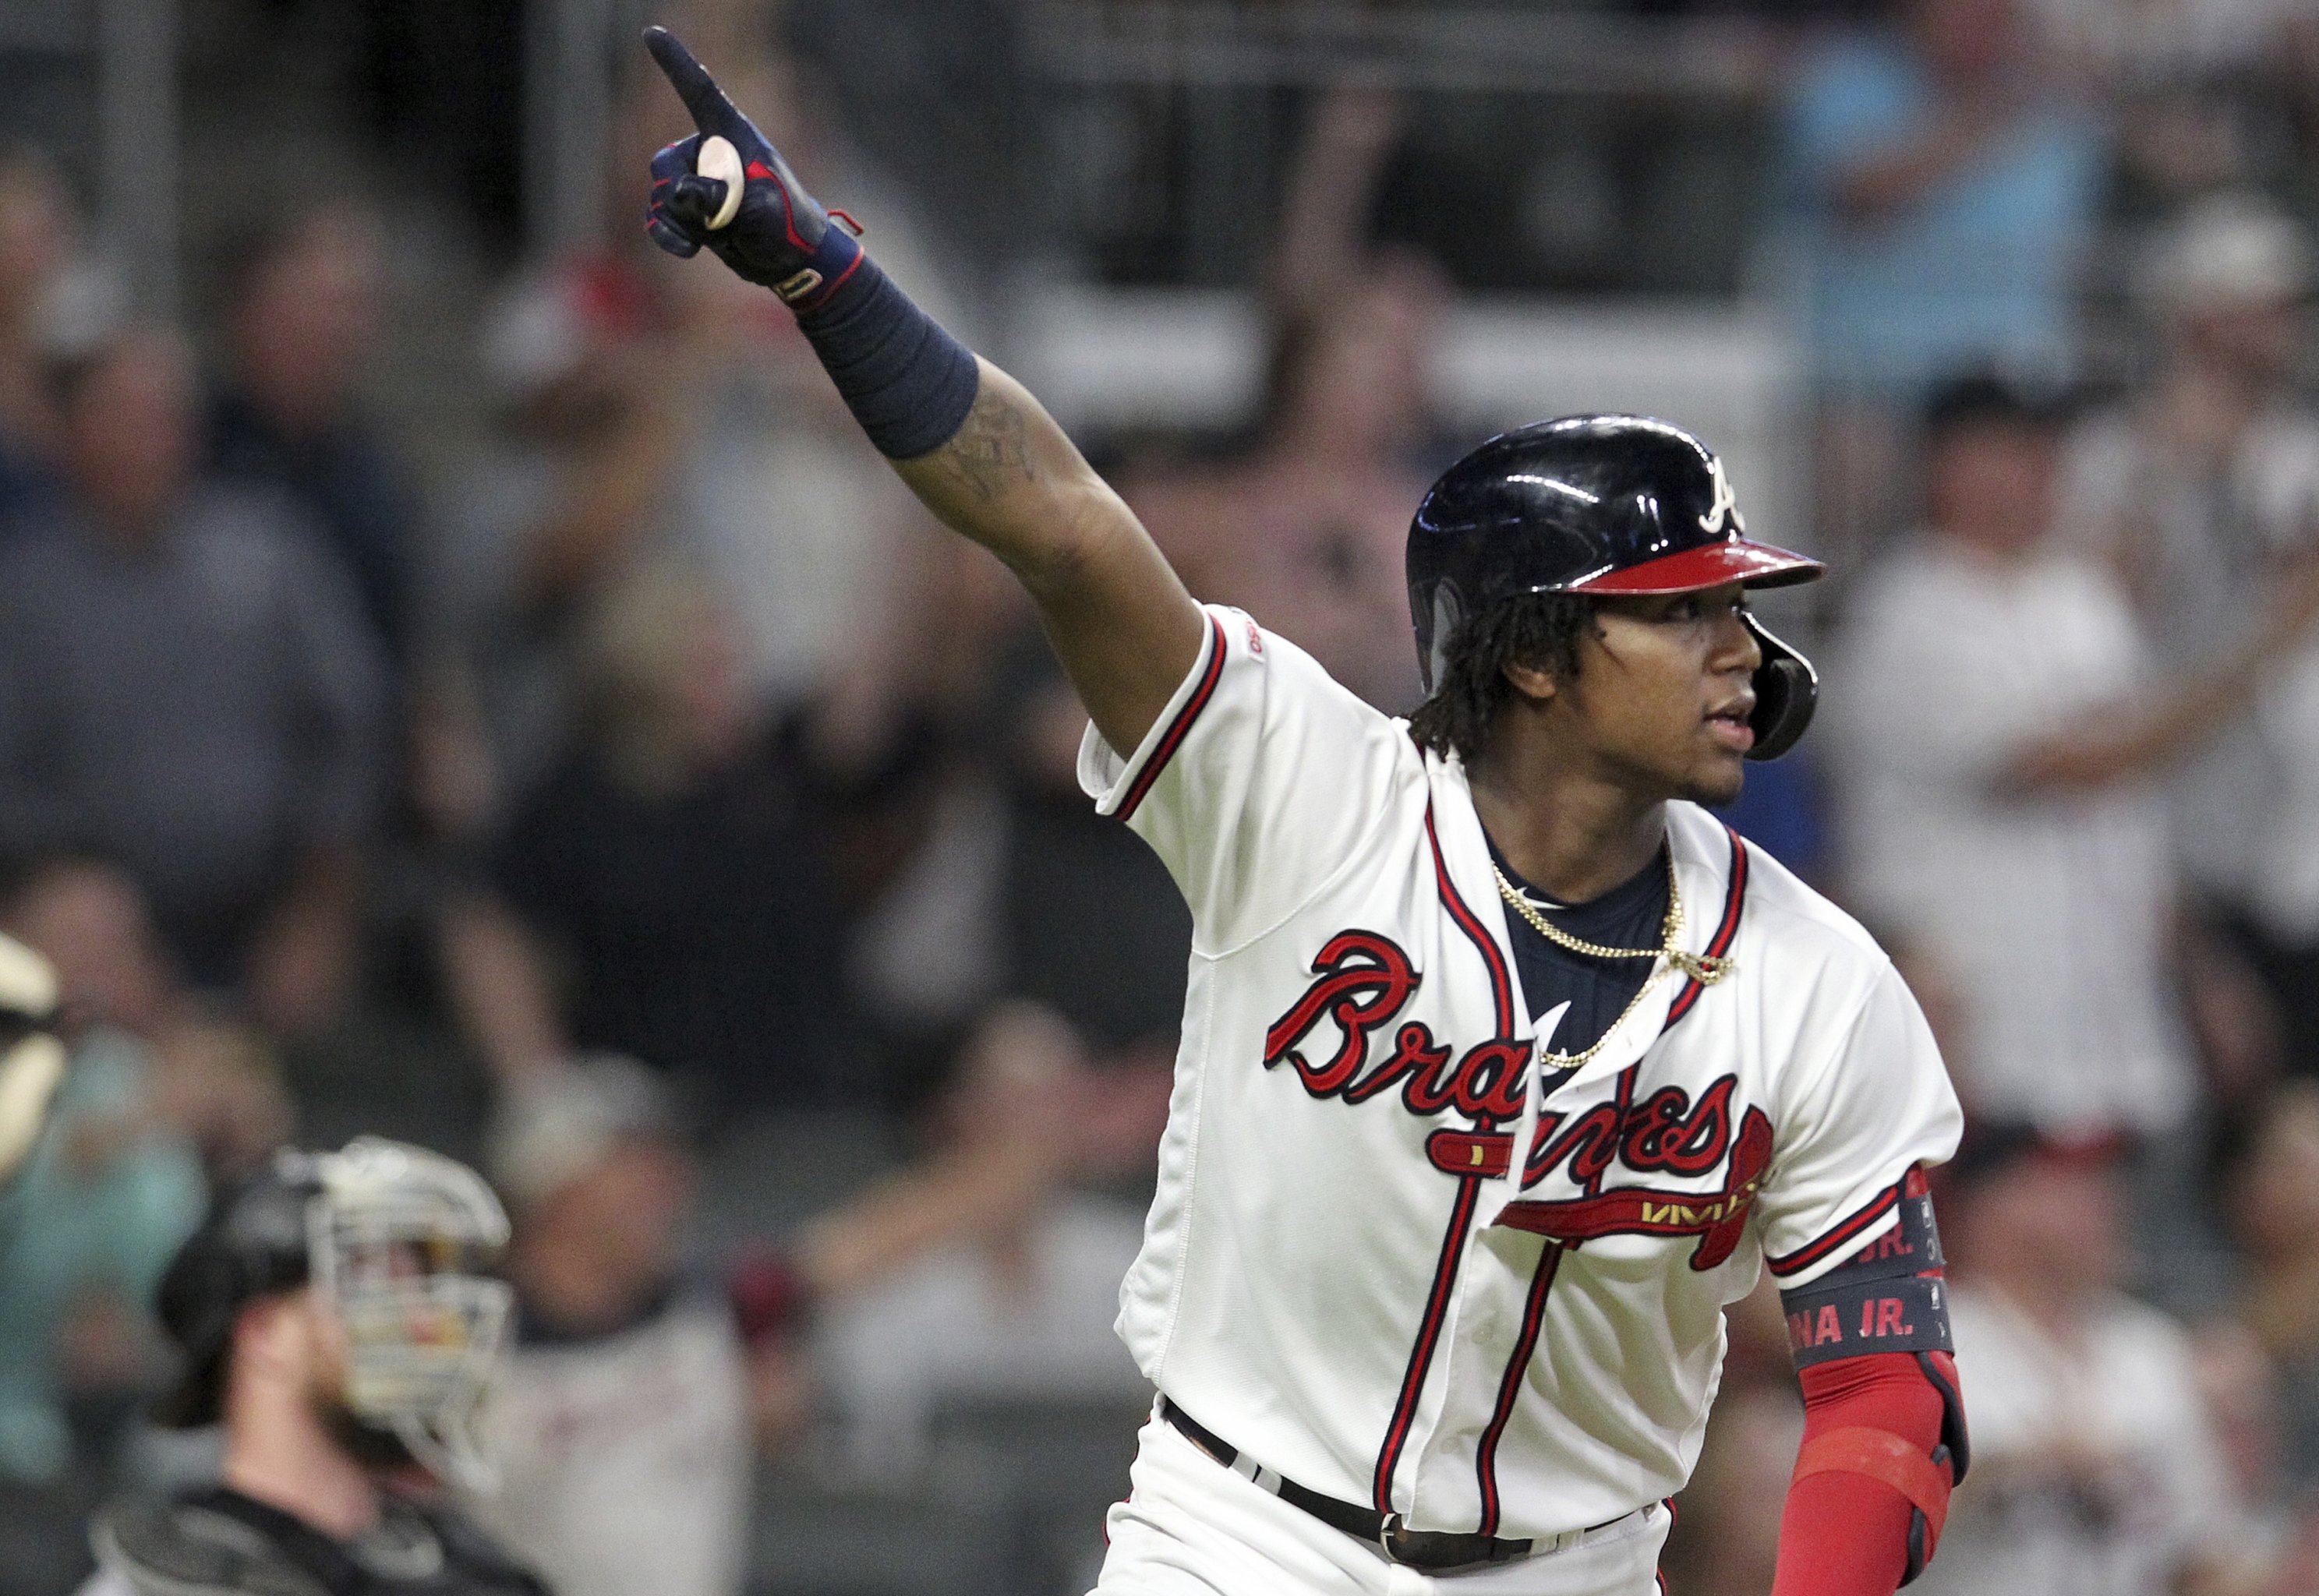 The Beast' Is Born: 21-Year-Old Ronald Acuna Jr. Is the New King of the ATL, News, Scores, Highlights, Stats, and Rumors